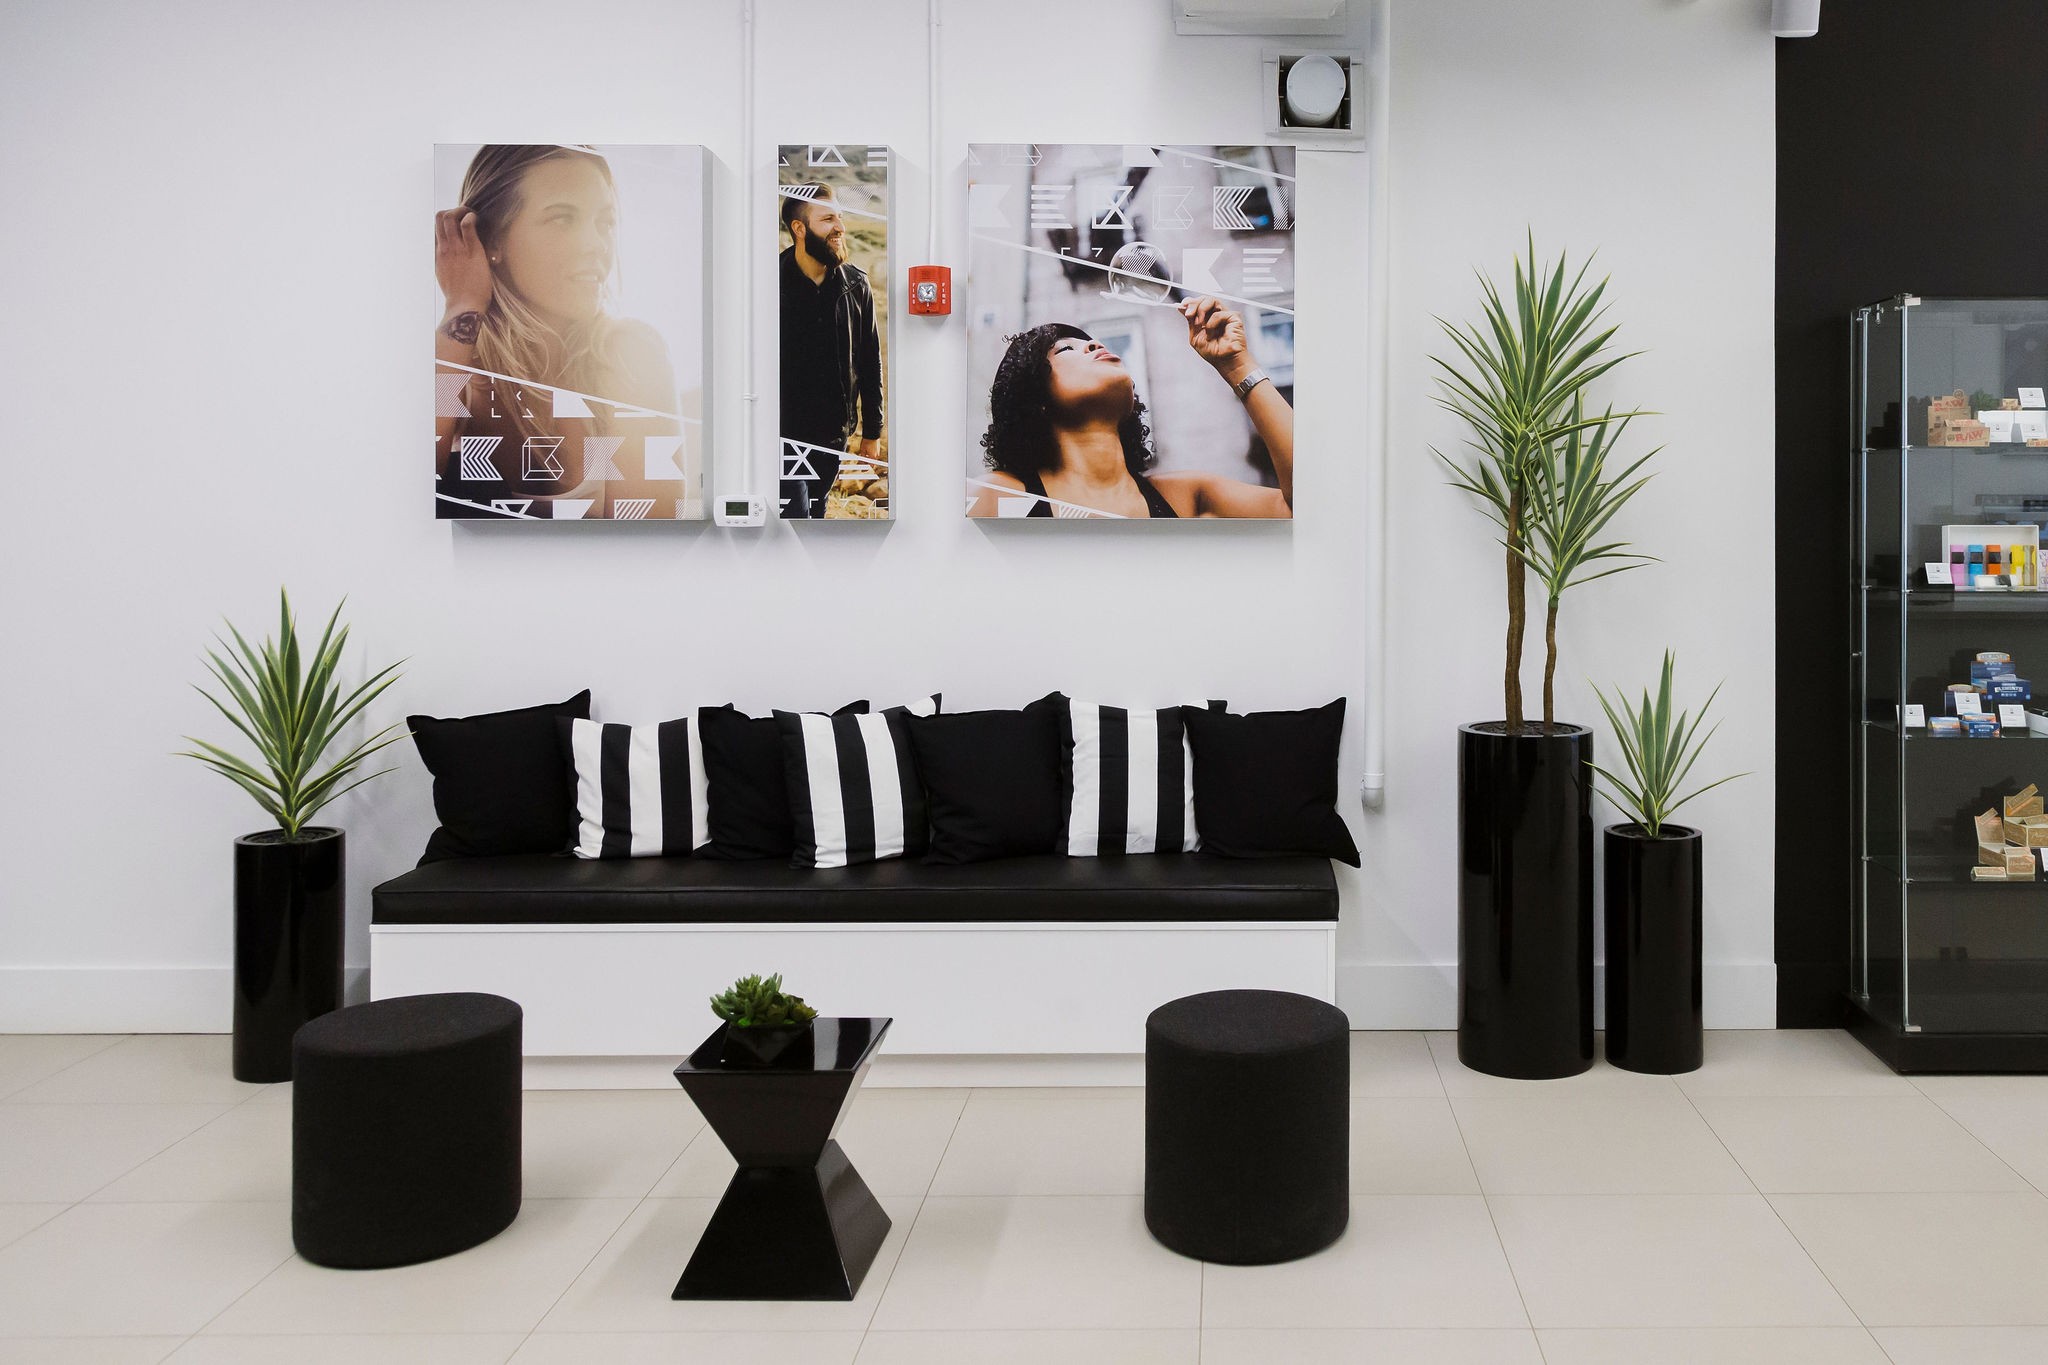 Kiaro in Saskatoon SK Cannabis Retail Design Couch and lounge in retail space by Cutler